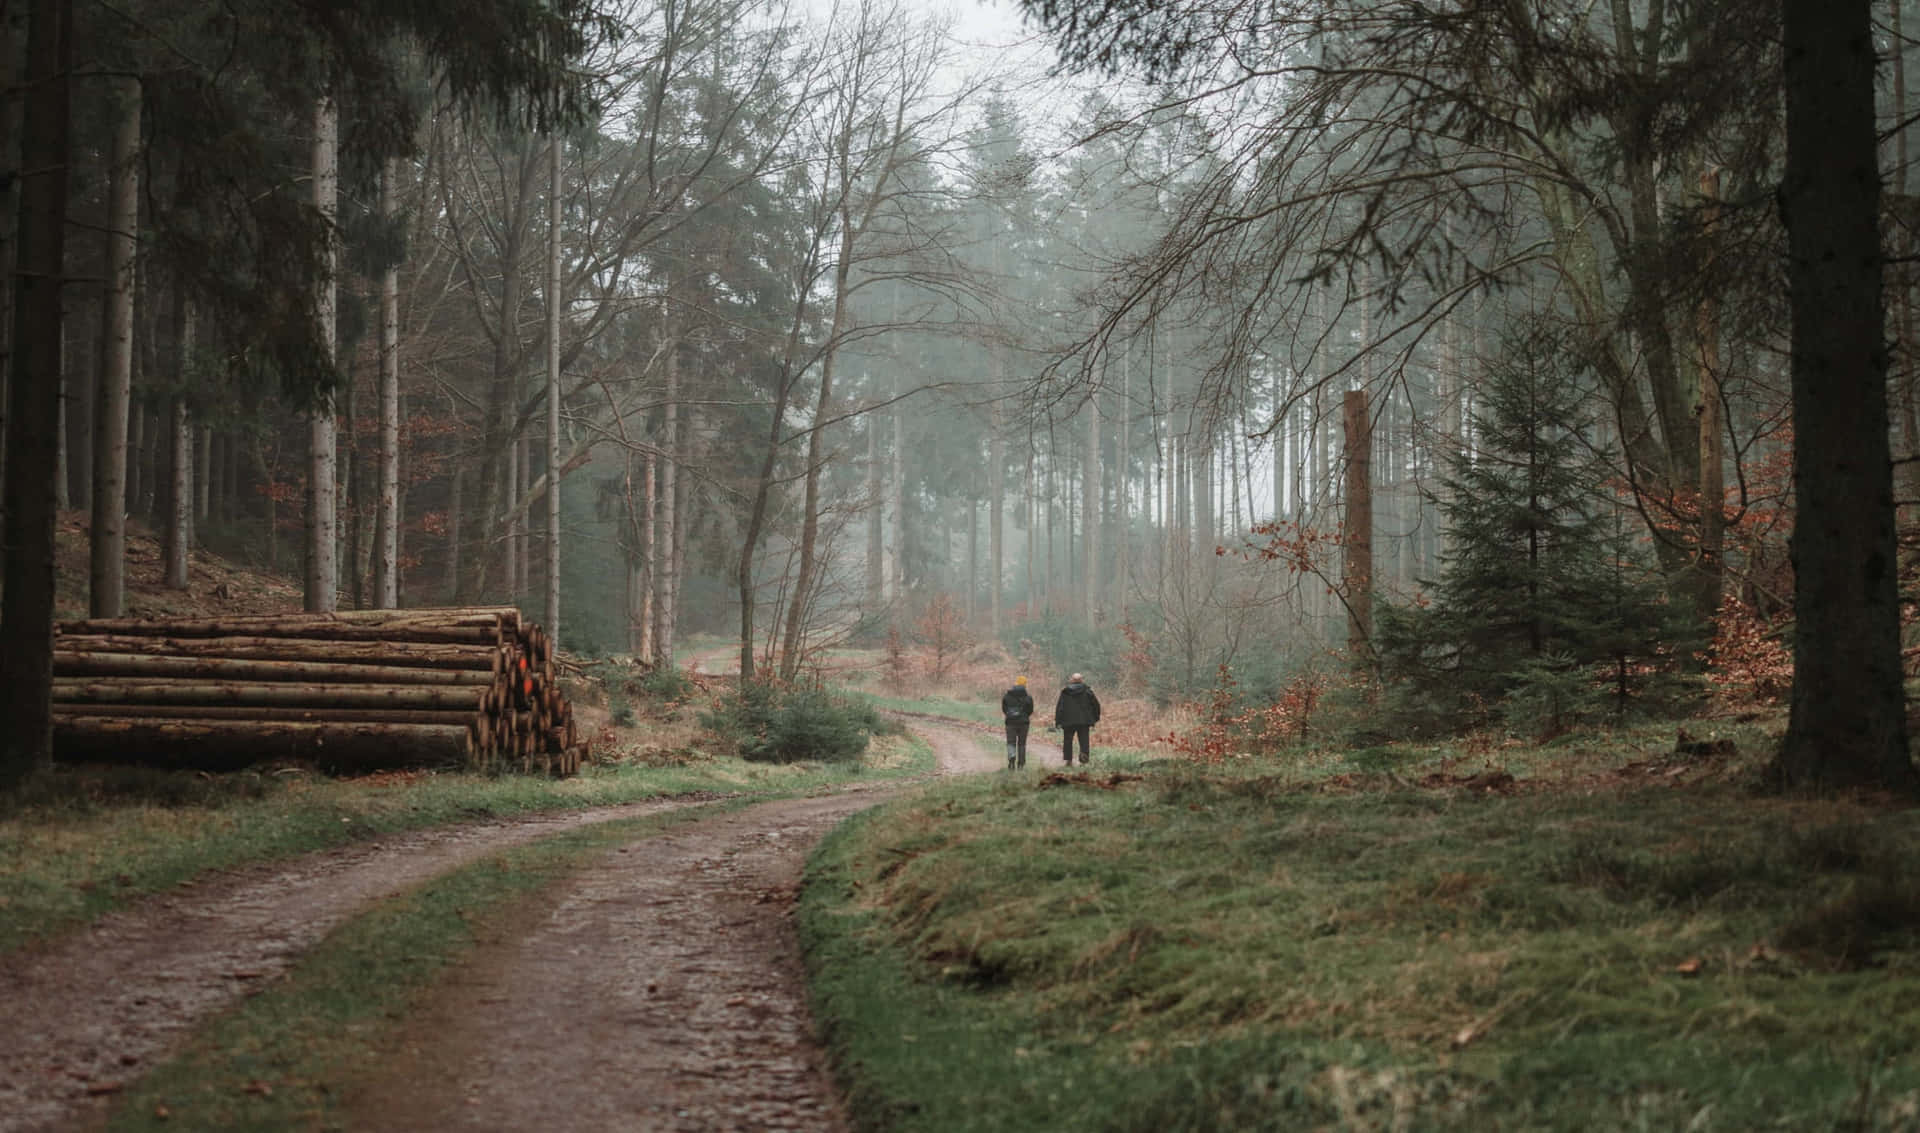 two people walking down a dirt road in the forest